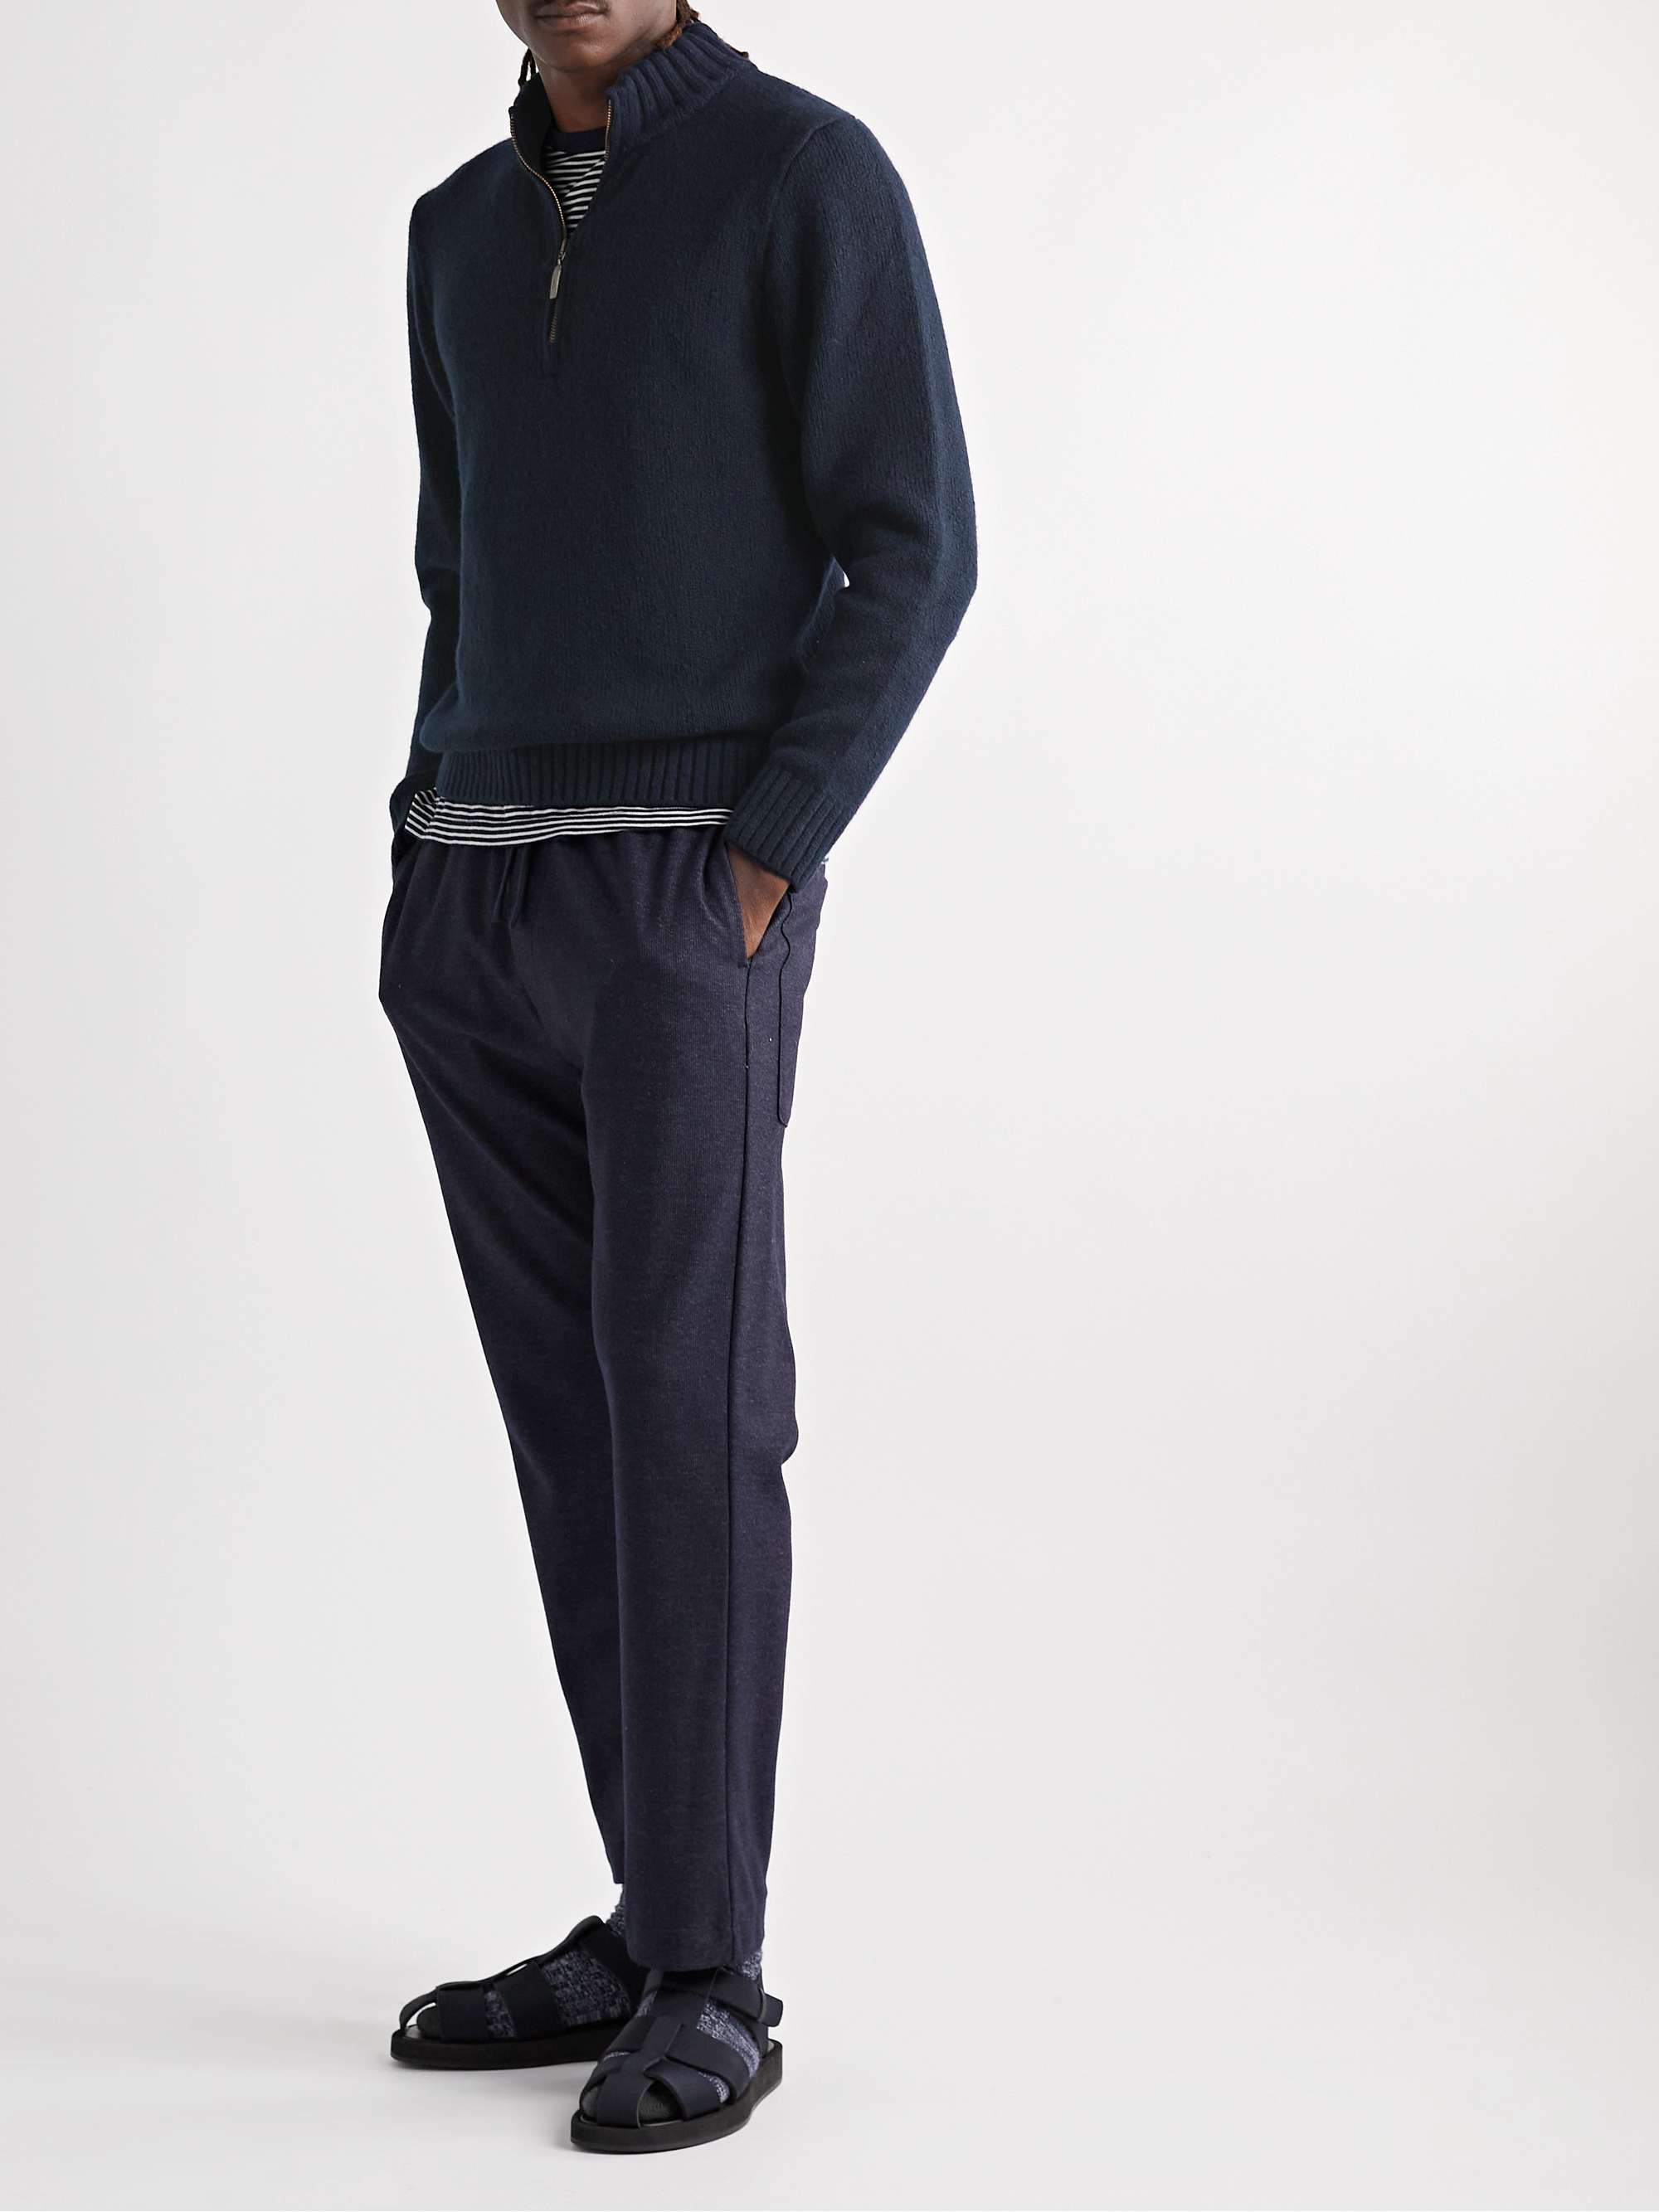 INIS MEÁIN Donegal Merino Wool and Cashmere-Blend Half-Zip Sweater